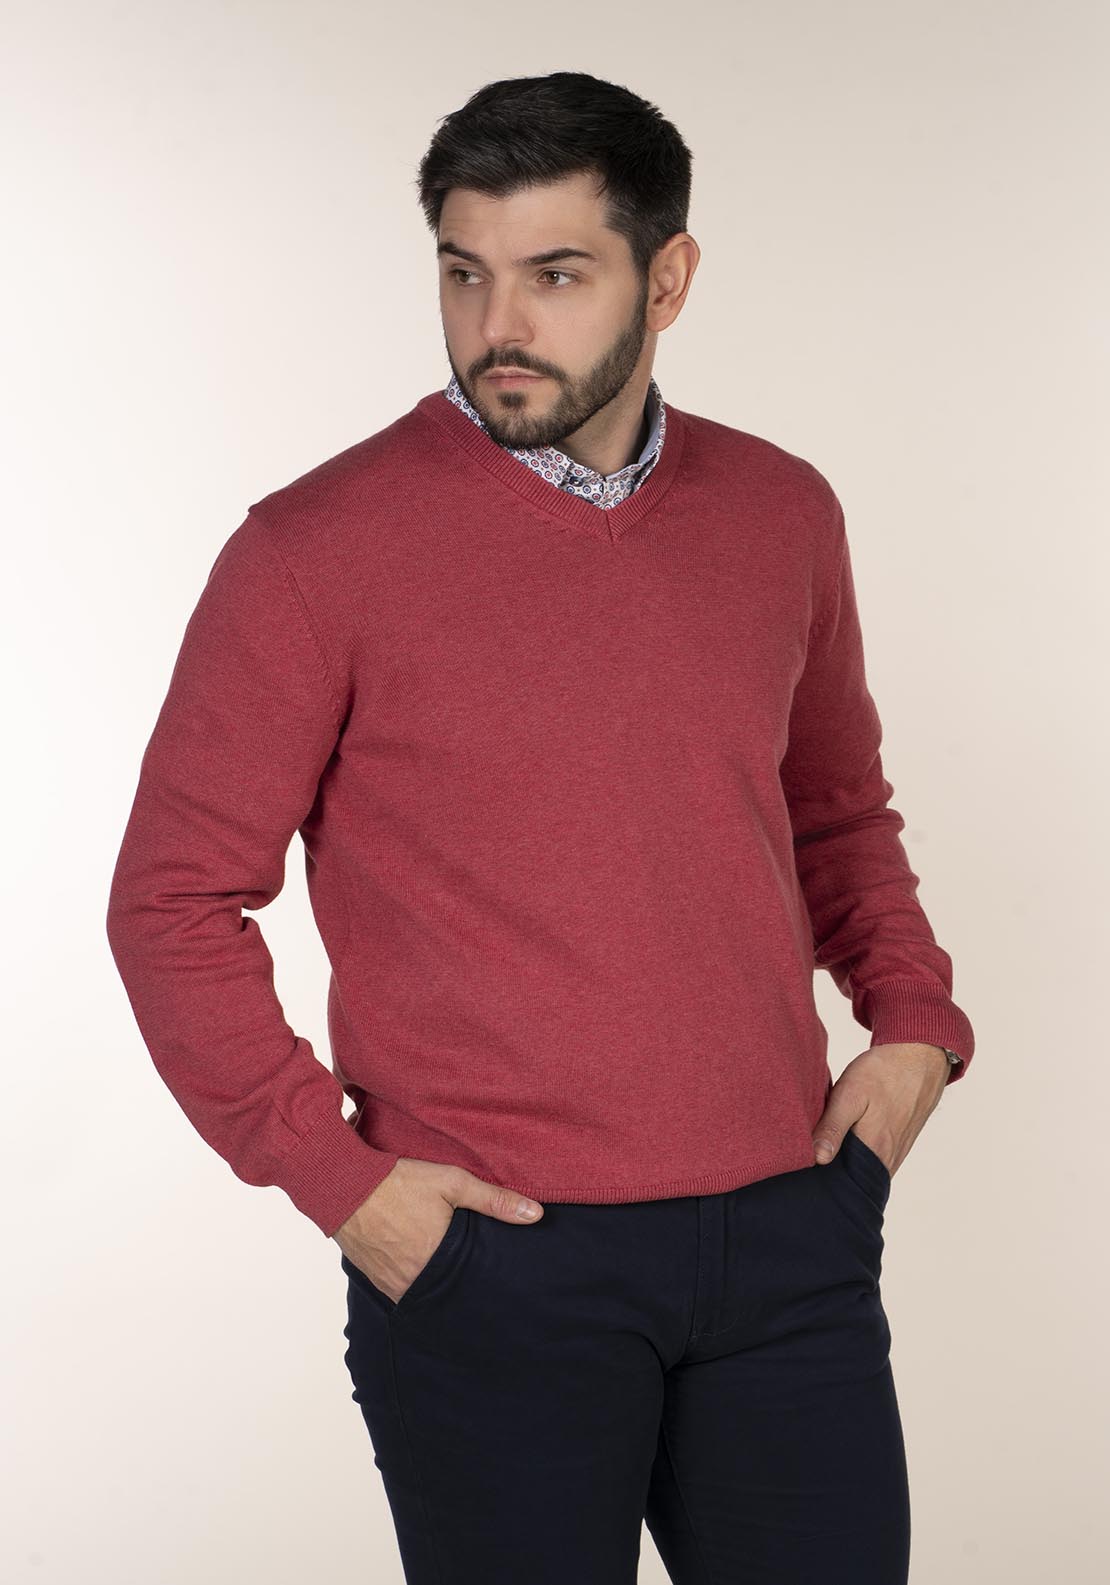 Yeats Plain Cotton V Neck Sweaters 3 Shaws Department Stores